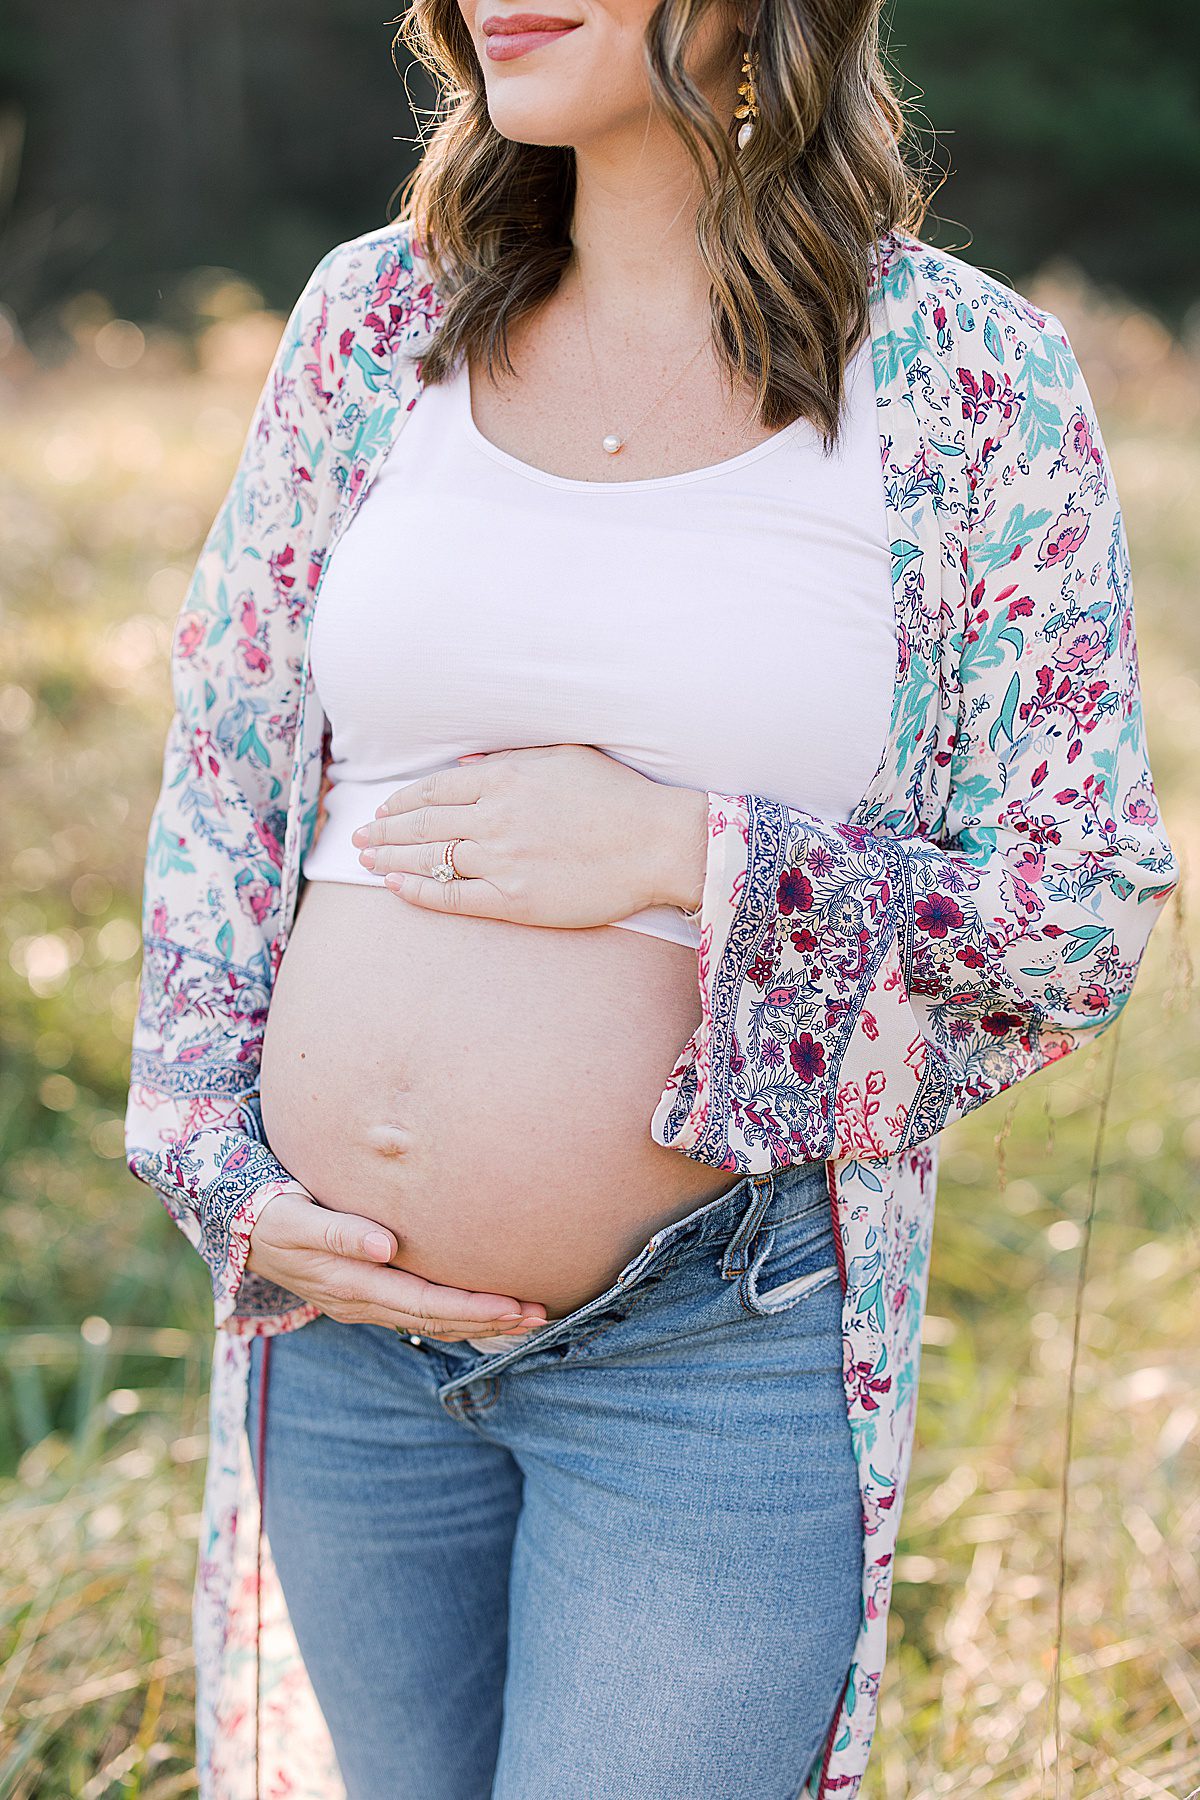 Girl Holding Pregnant Belly Photo